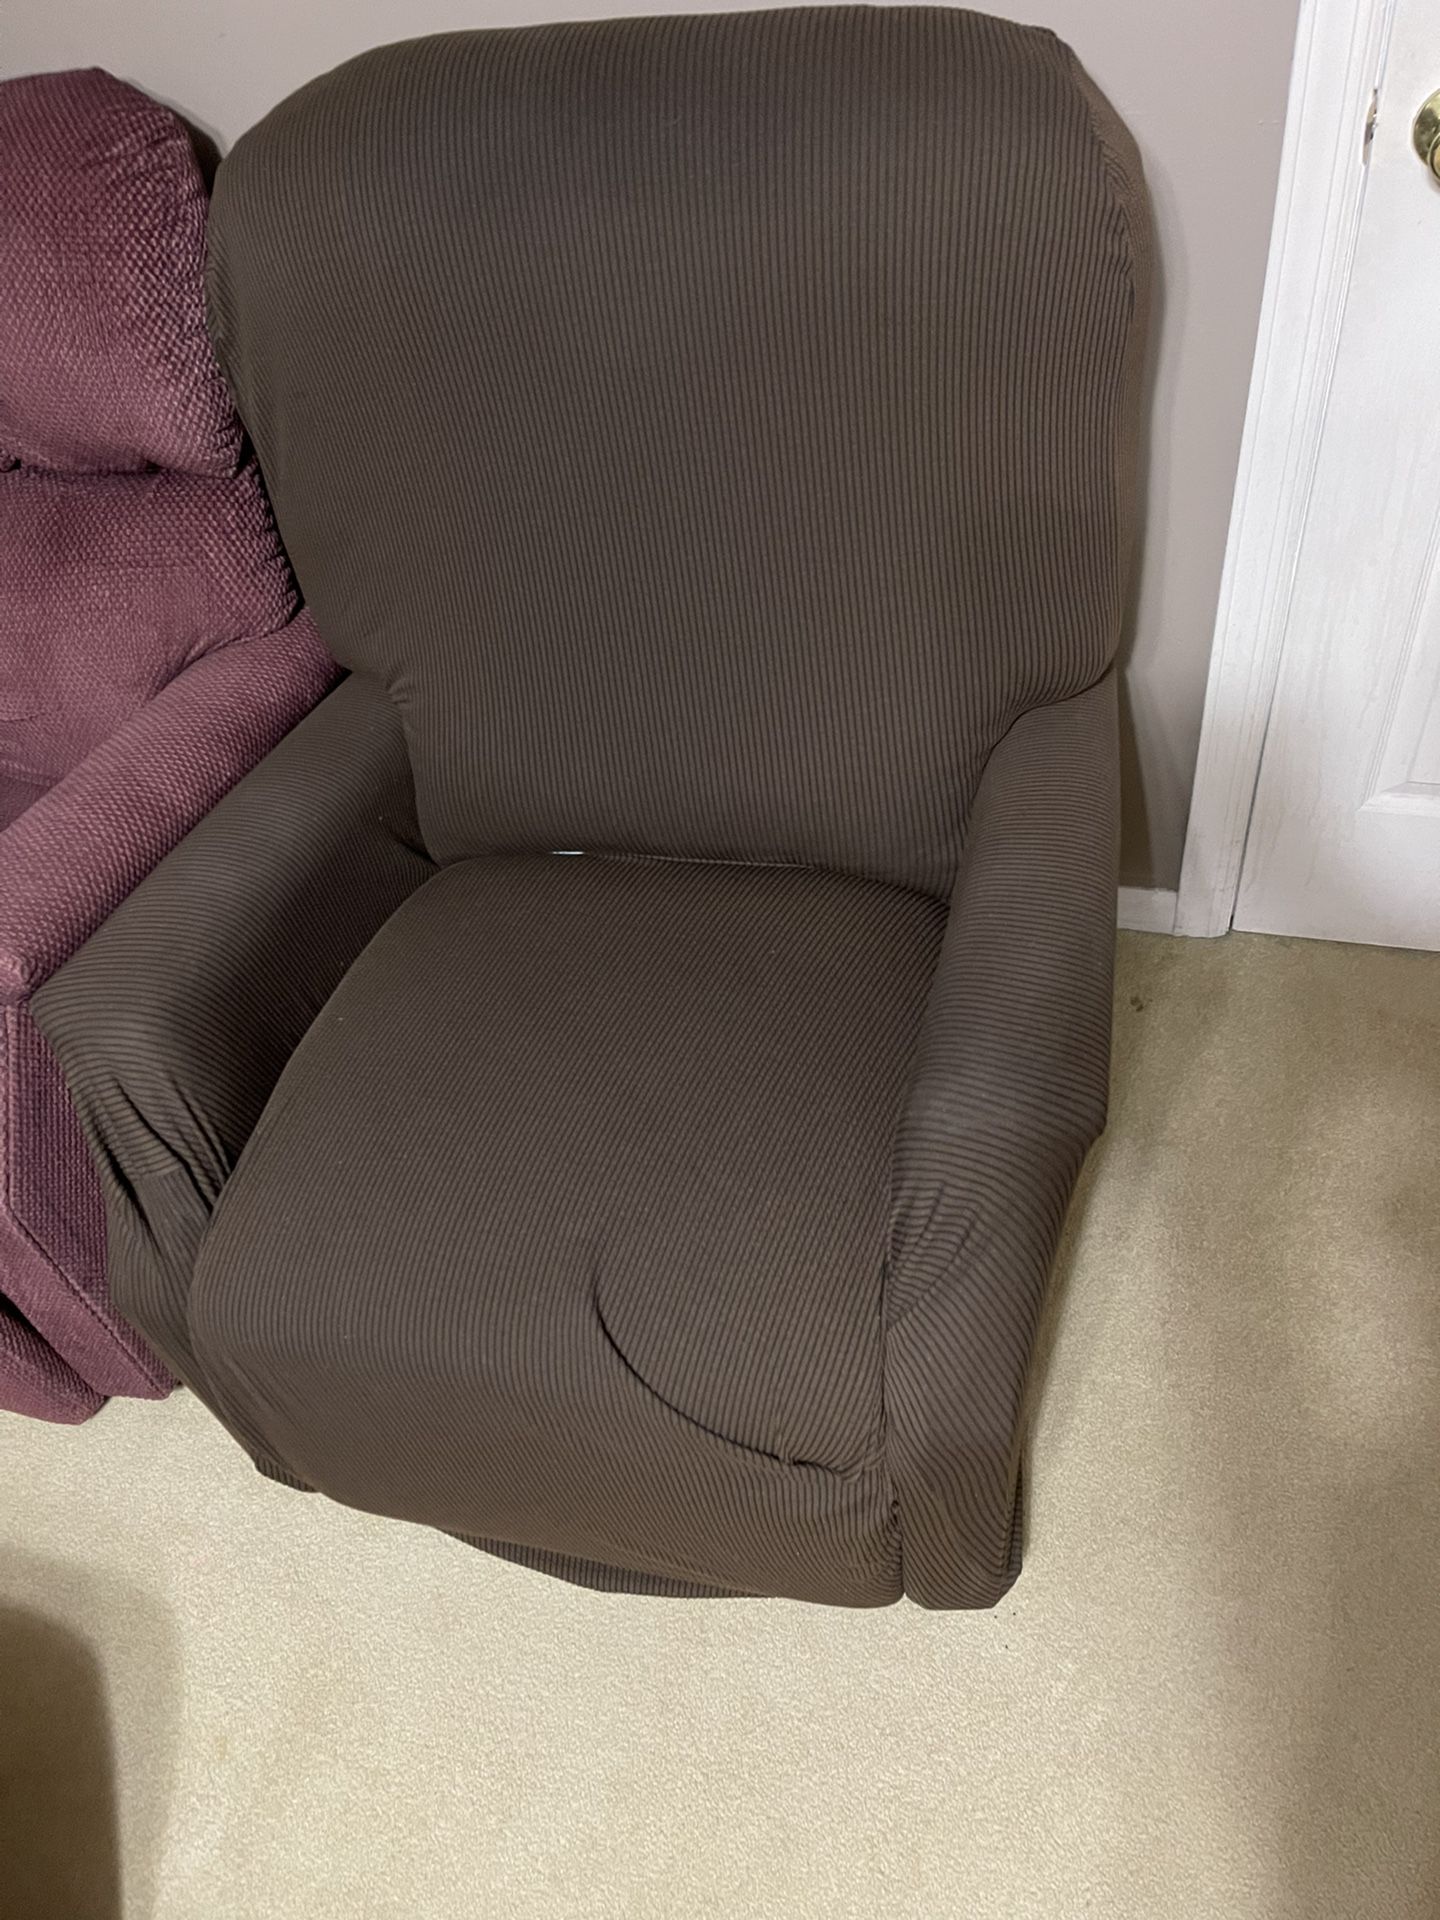 Lift Reclining Chair Brown Faux Leather (starting To Peel) With Brown Fabric Cover Good Condition 